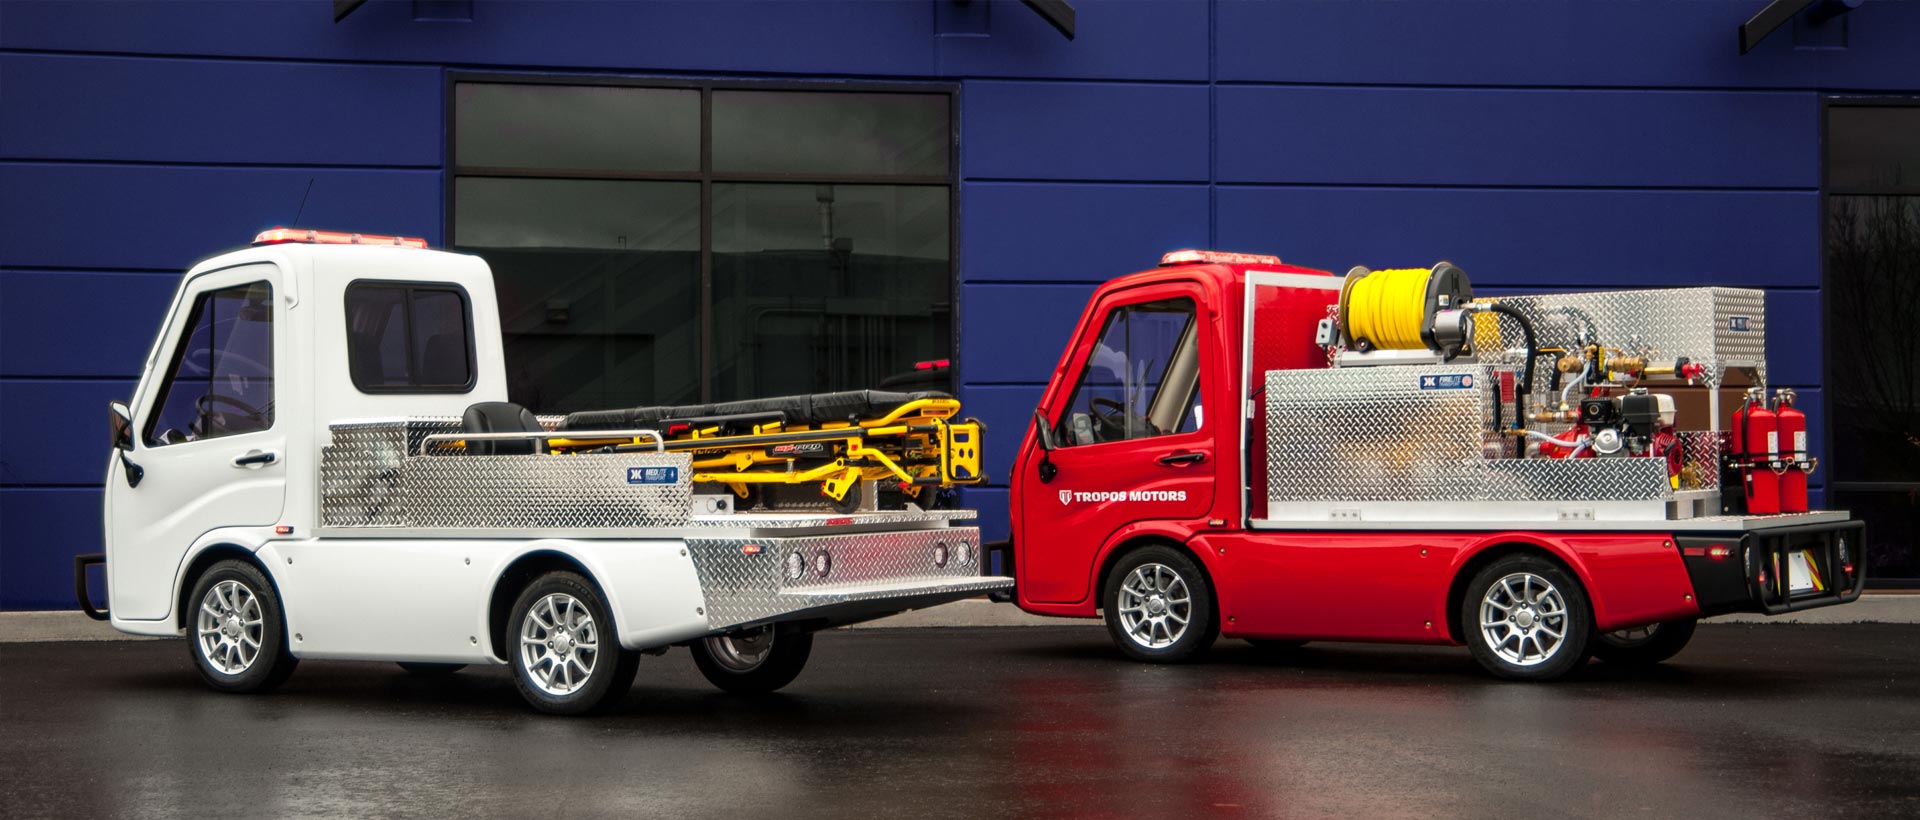 Electric emergency vehicles Tropos Motors shows how to start small